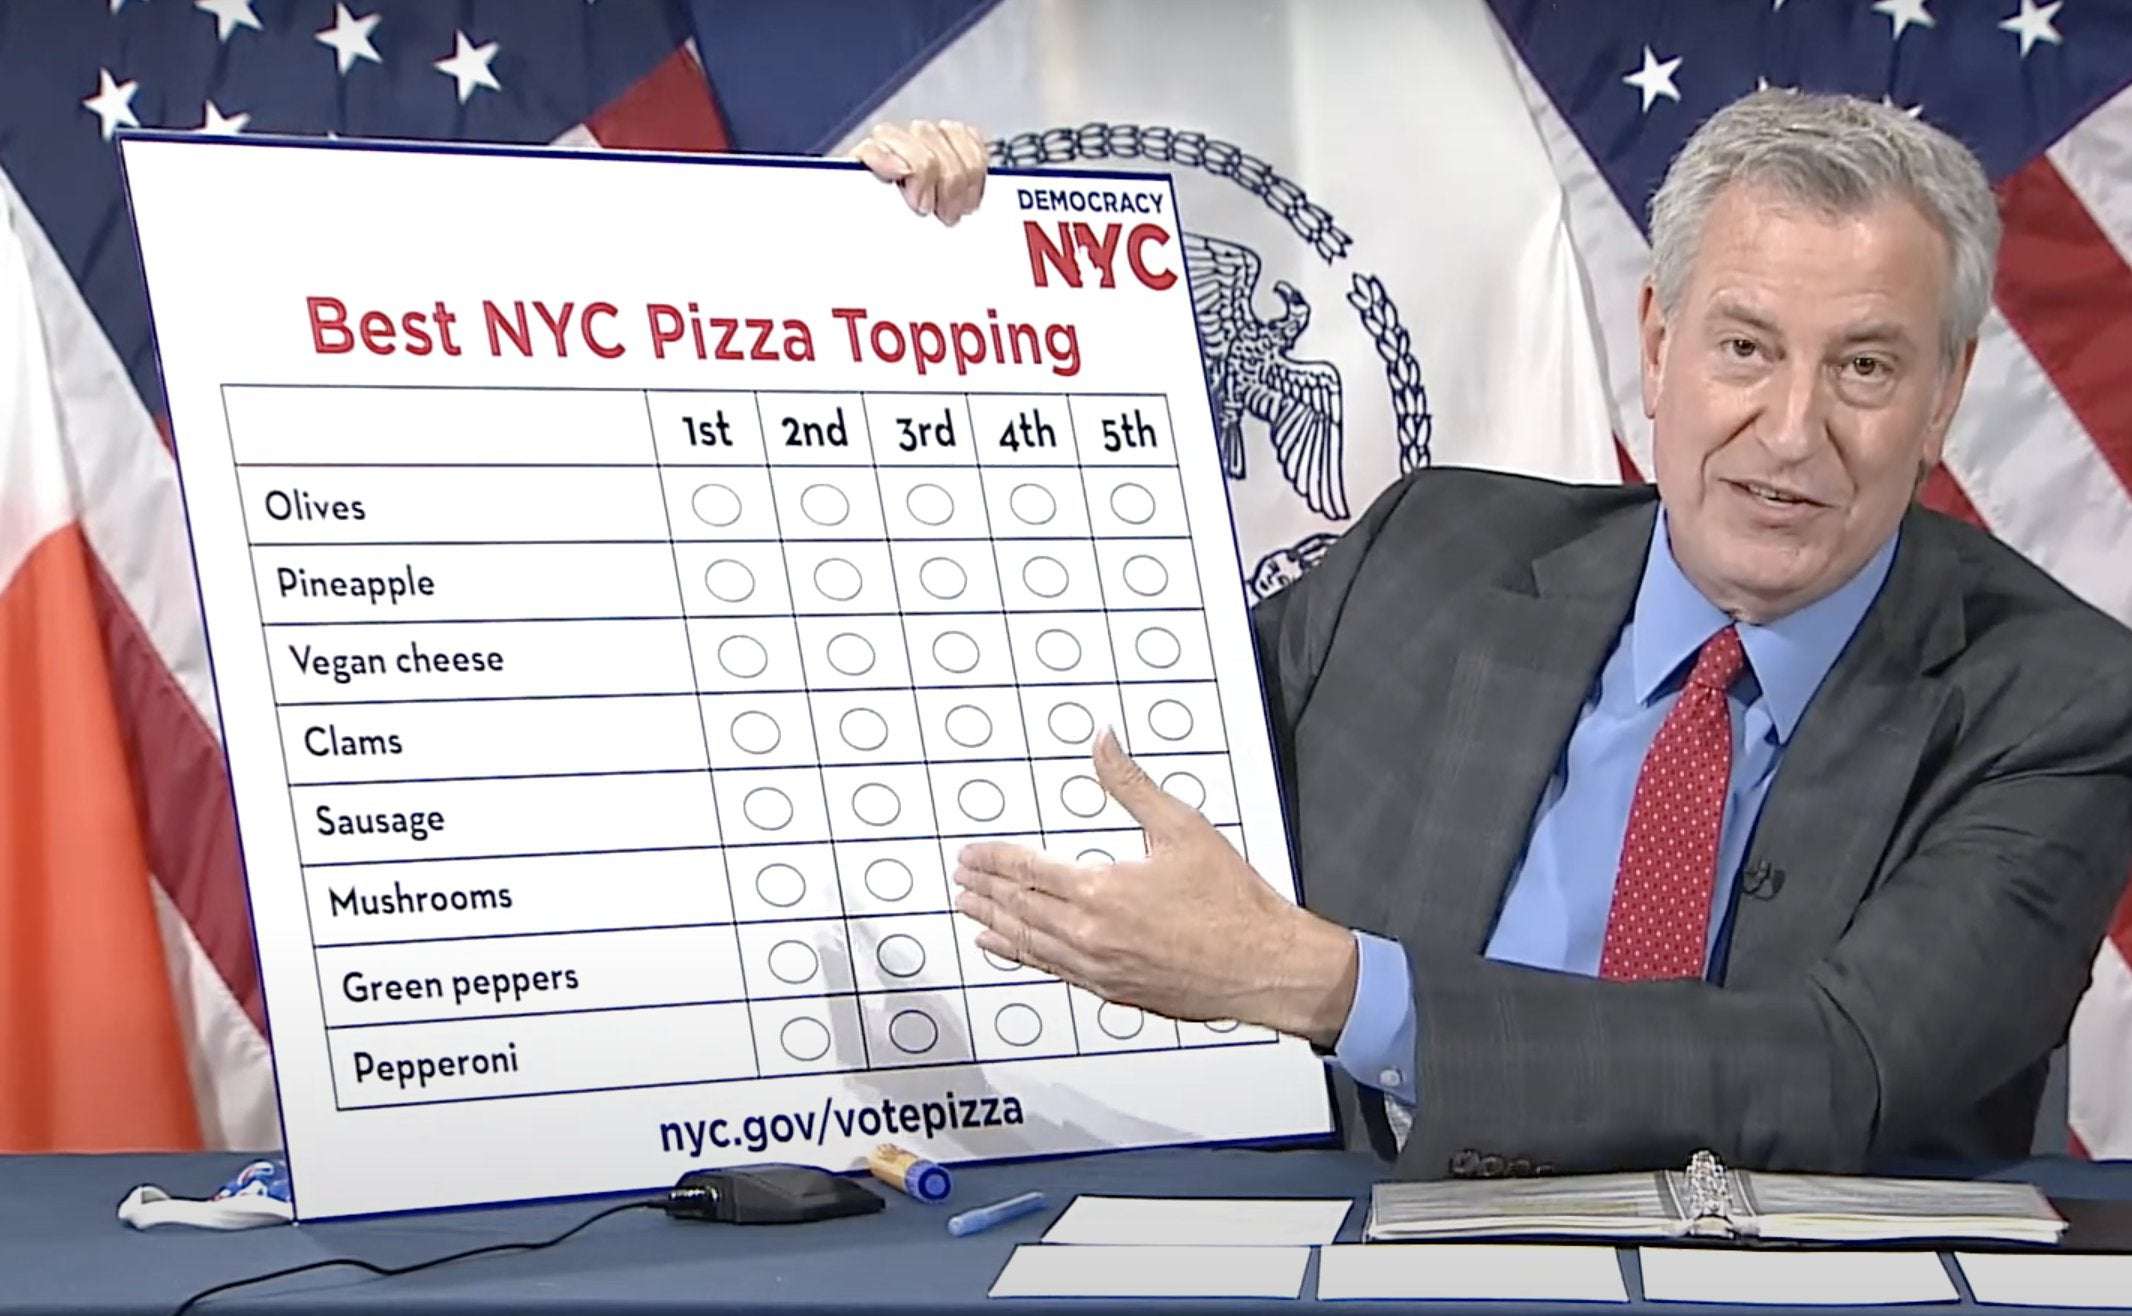 image for NYC launches pizza topping ballot to demonstrate ranked-choice voting; mayor endorses pepperoni